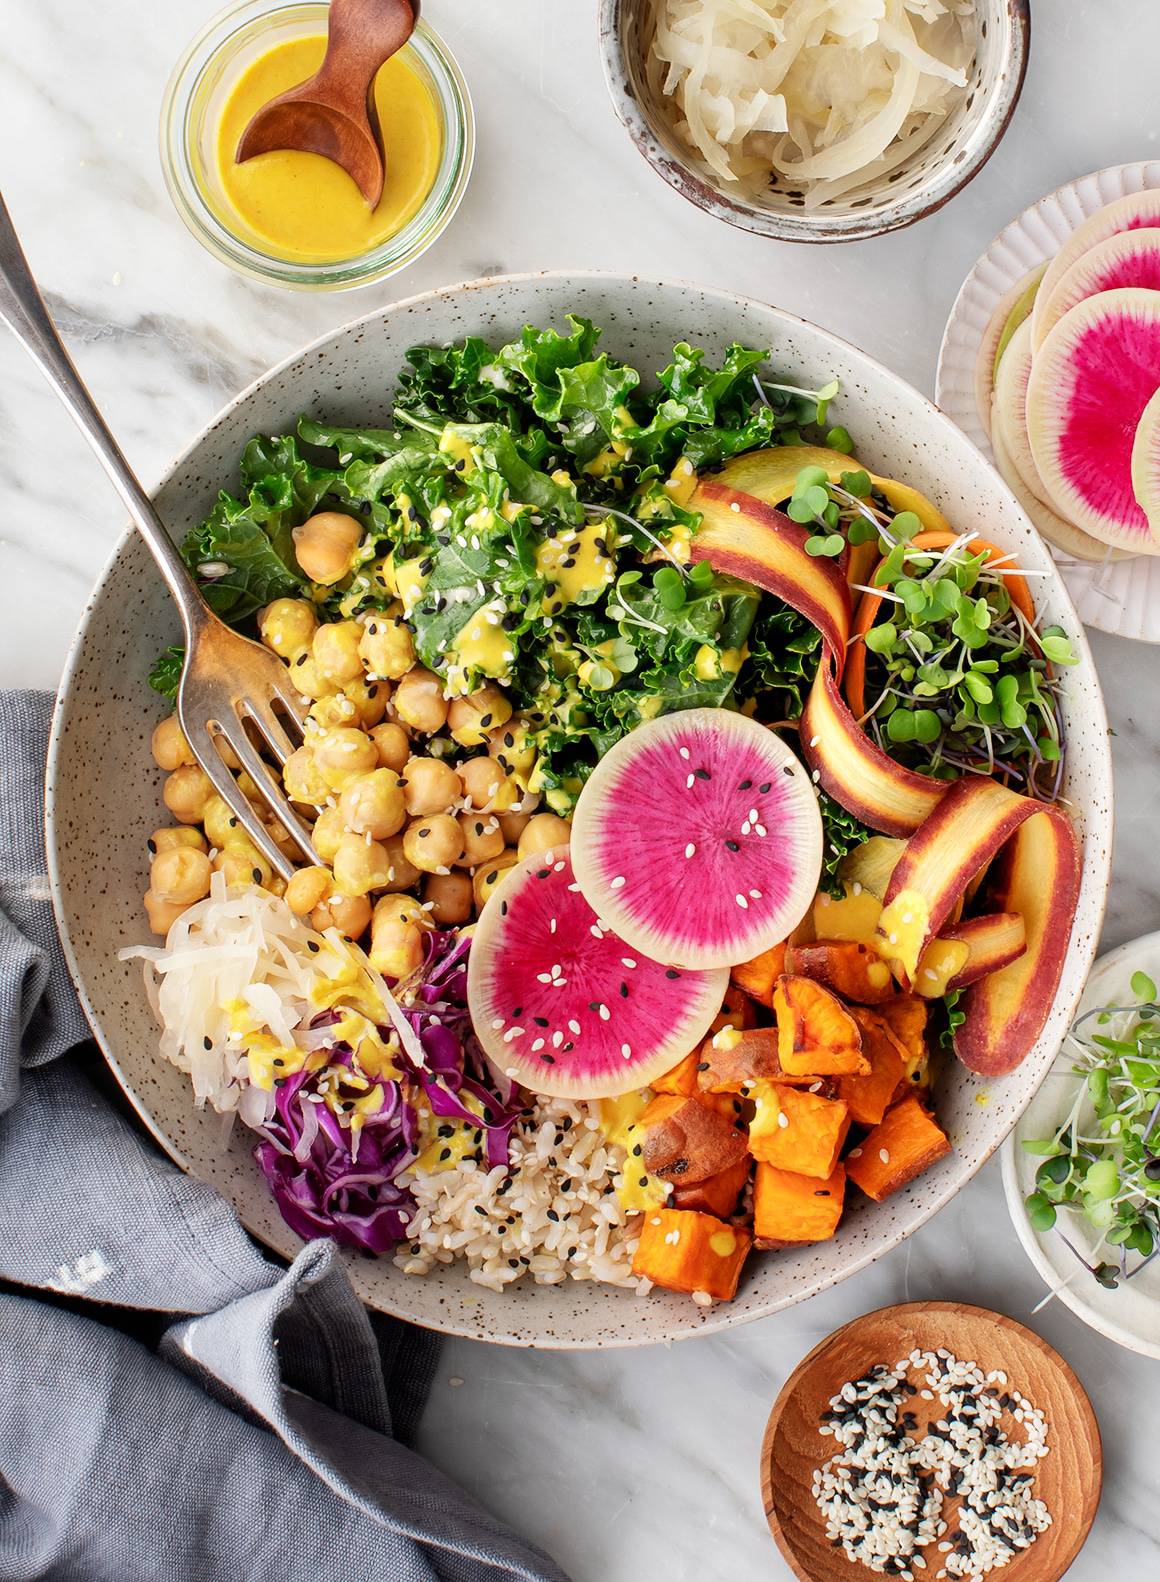 Tools to Help You Transition to a Plant-Based Diet: The 5 Easy Steps to Vibrant Health